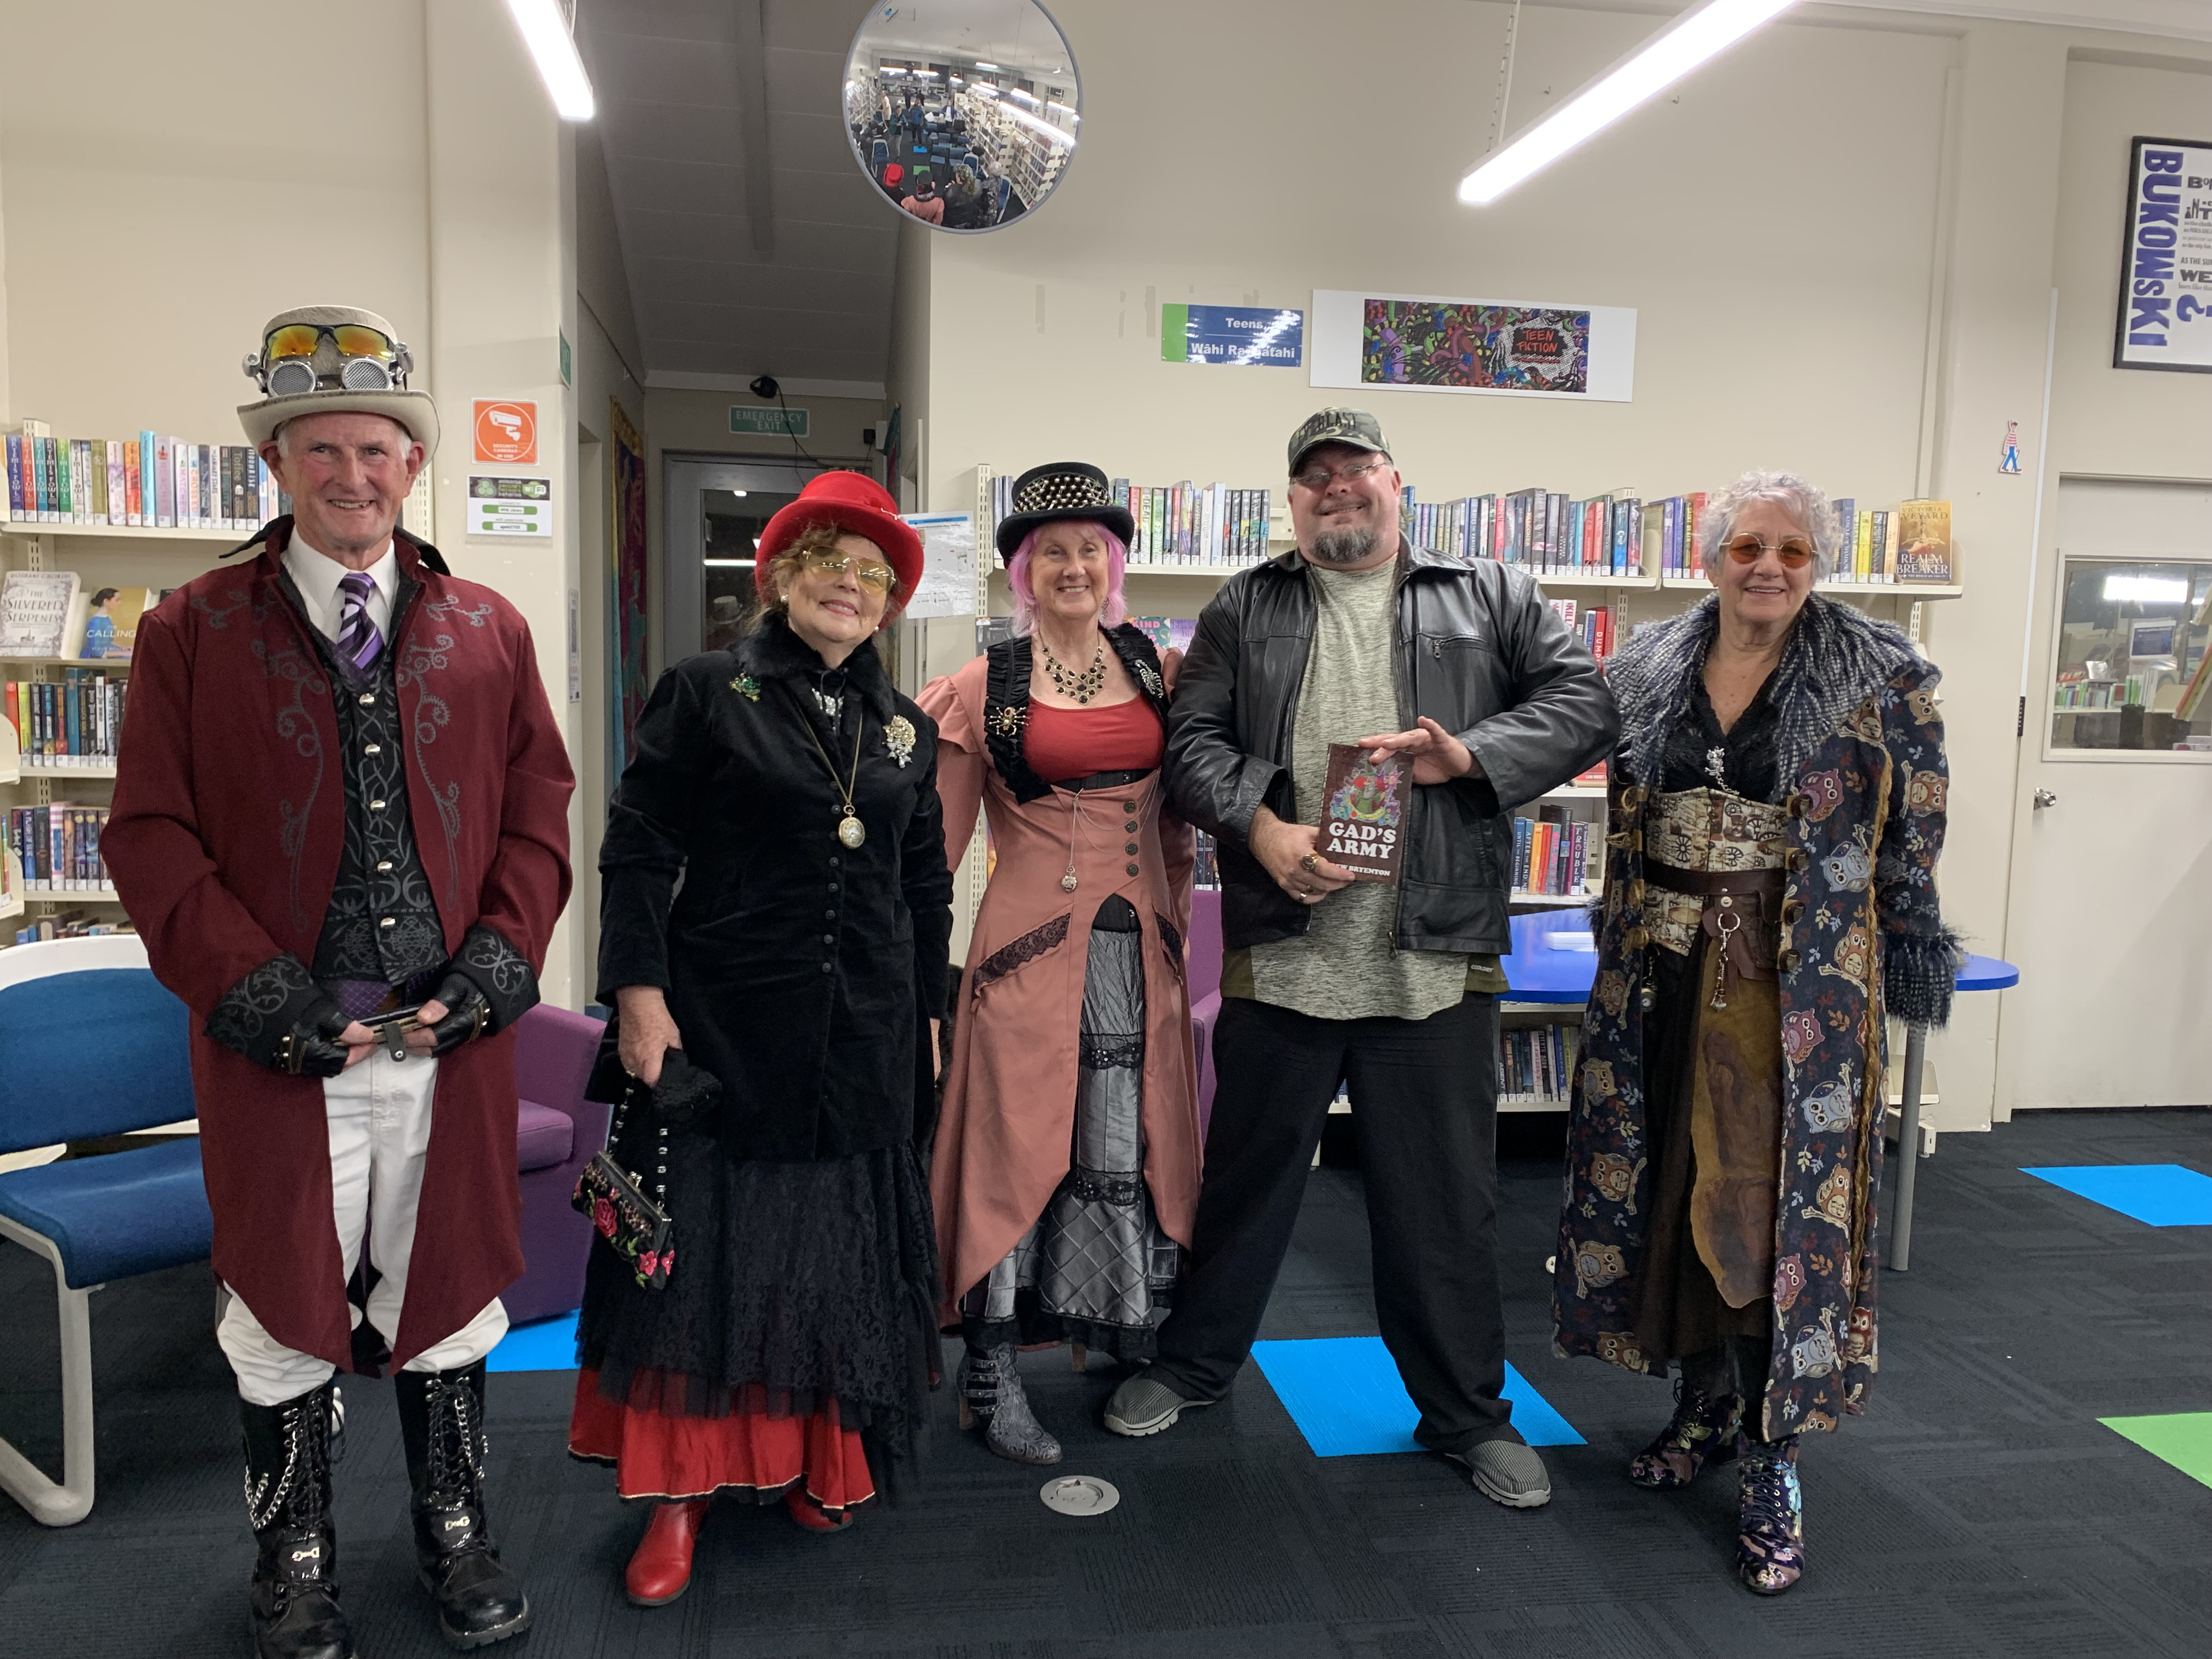 Andy Bryenton with Dargaville Steampunk group